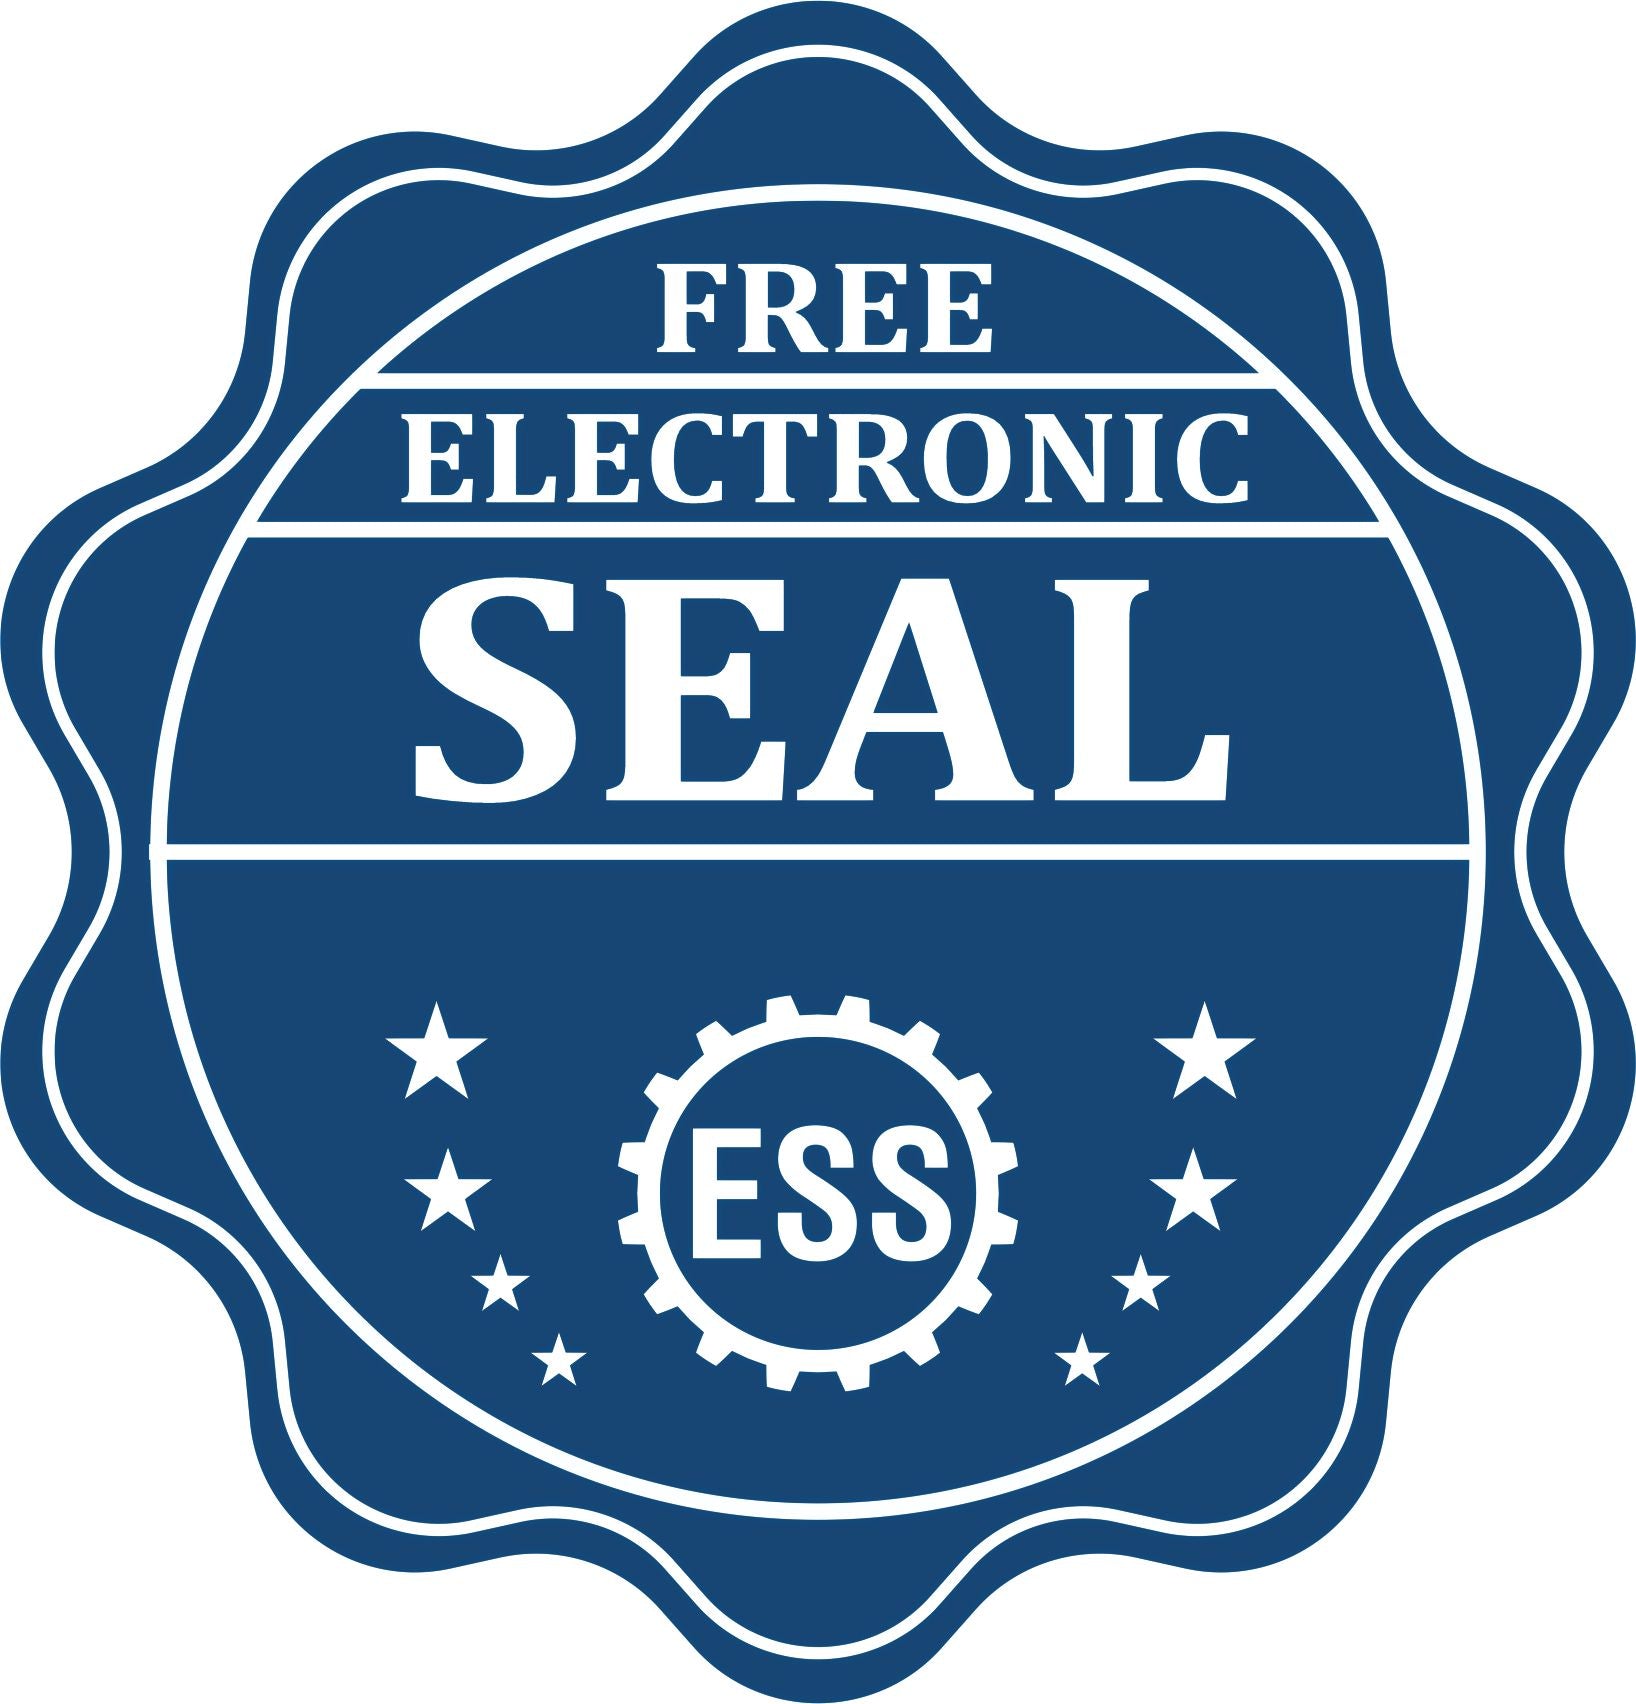 A badge showing a free electronic seal for the Premium MaxLight Pre-Inked District of Columbia Engineering Stamp with stars and the ESS gear on the emblem.